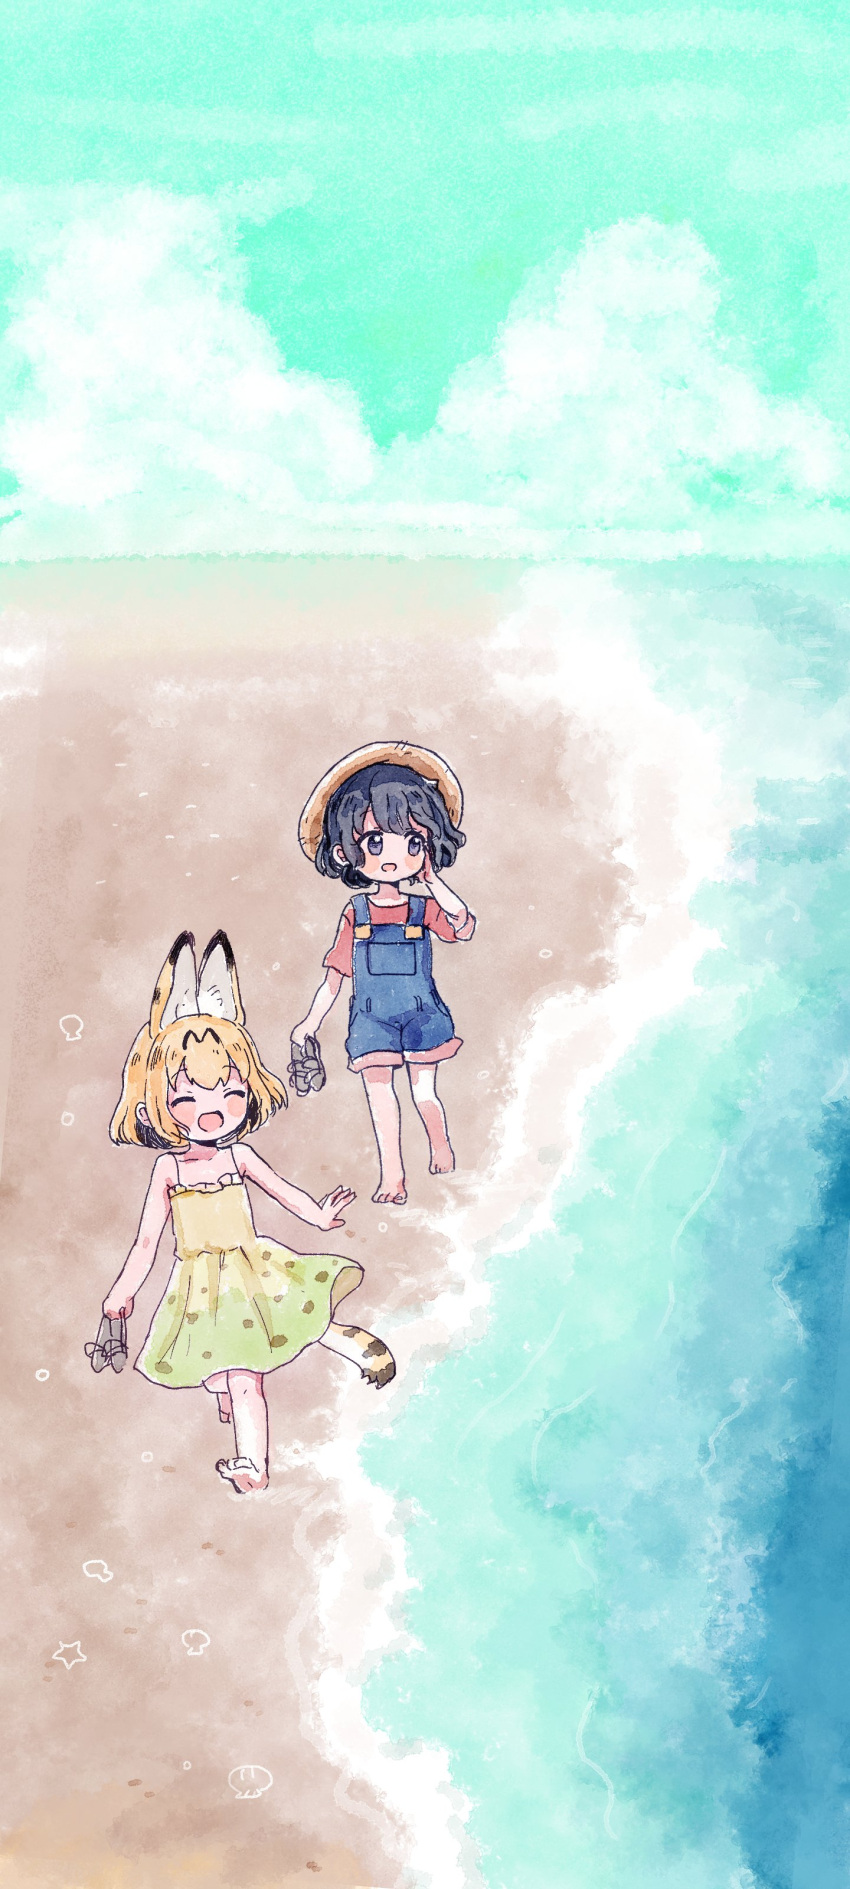 2girls absurdres alternate_costume animal_ears bare_shoulders barefoot beach black_hair blonde_hair casual closed_eyes commentary_request denim dress extra_ears eyebrows_visible_through_hair hat highres holding holding_shoes kaban_(kemono_friends) kemono_friends multiple_girls open_mouth overalls red_shirt san_sami serval_(kemono_friends) serval_ears serval_girl serval_print serval_tail shirt shoes short_hair sleeveless smile spaghetti_strap straw_hat sundress t-shirt tail yellow_dress